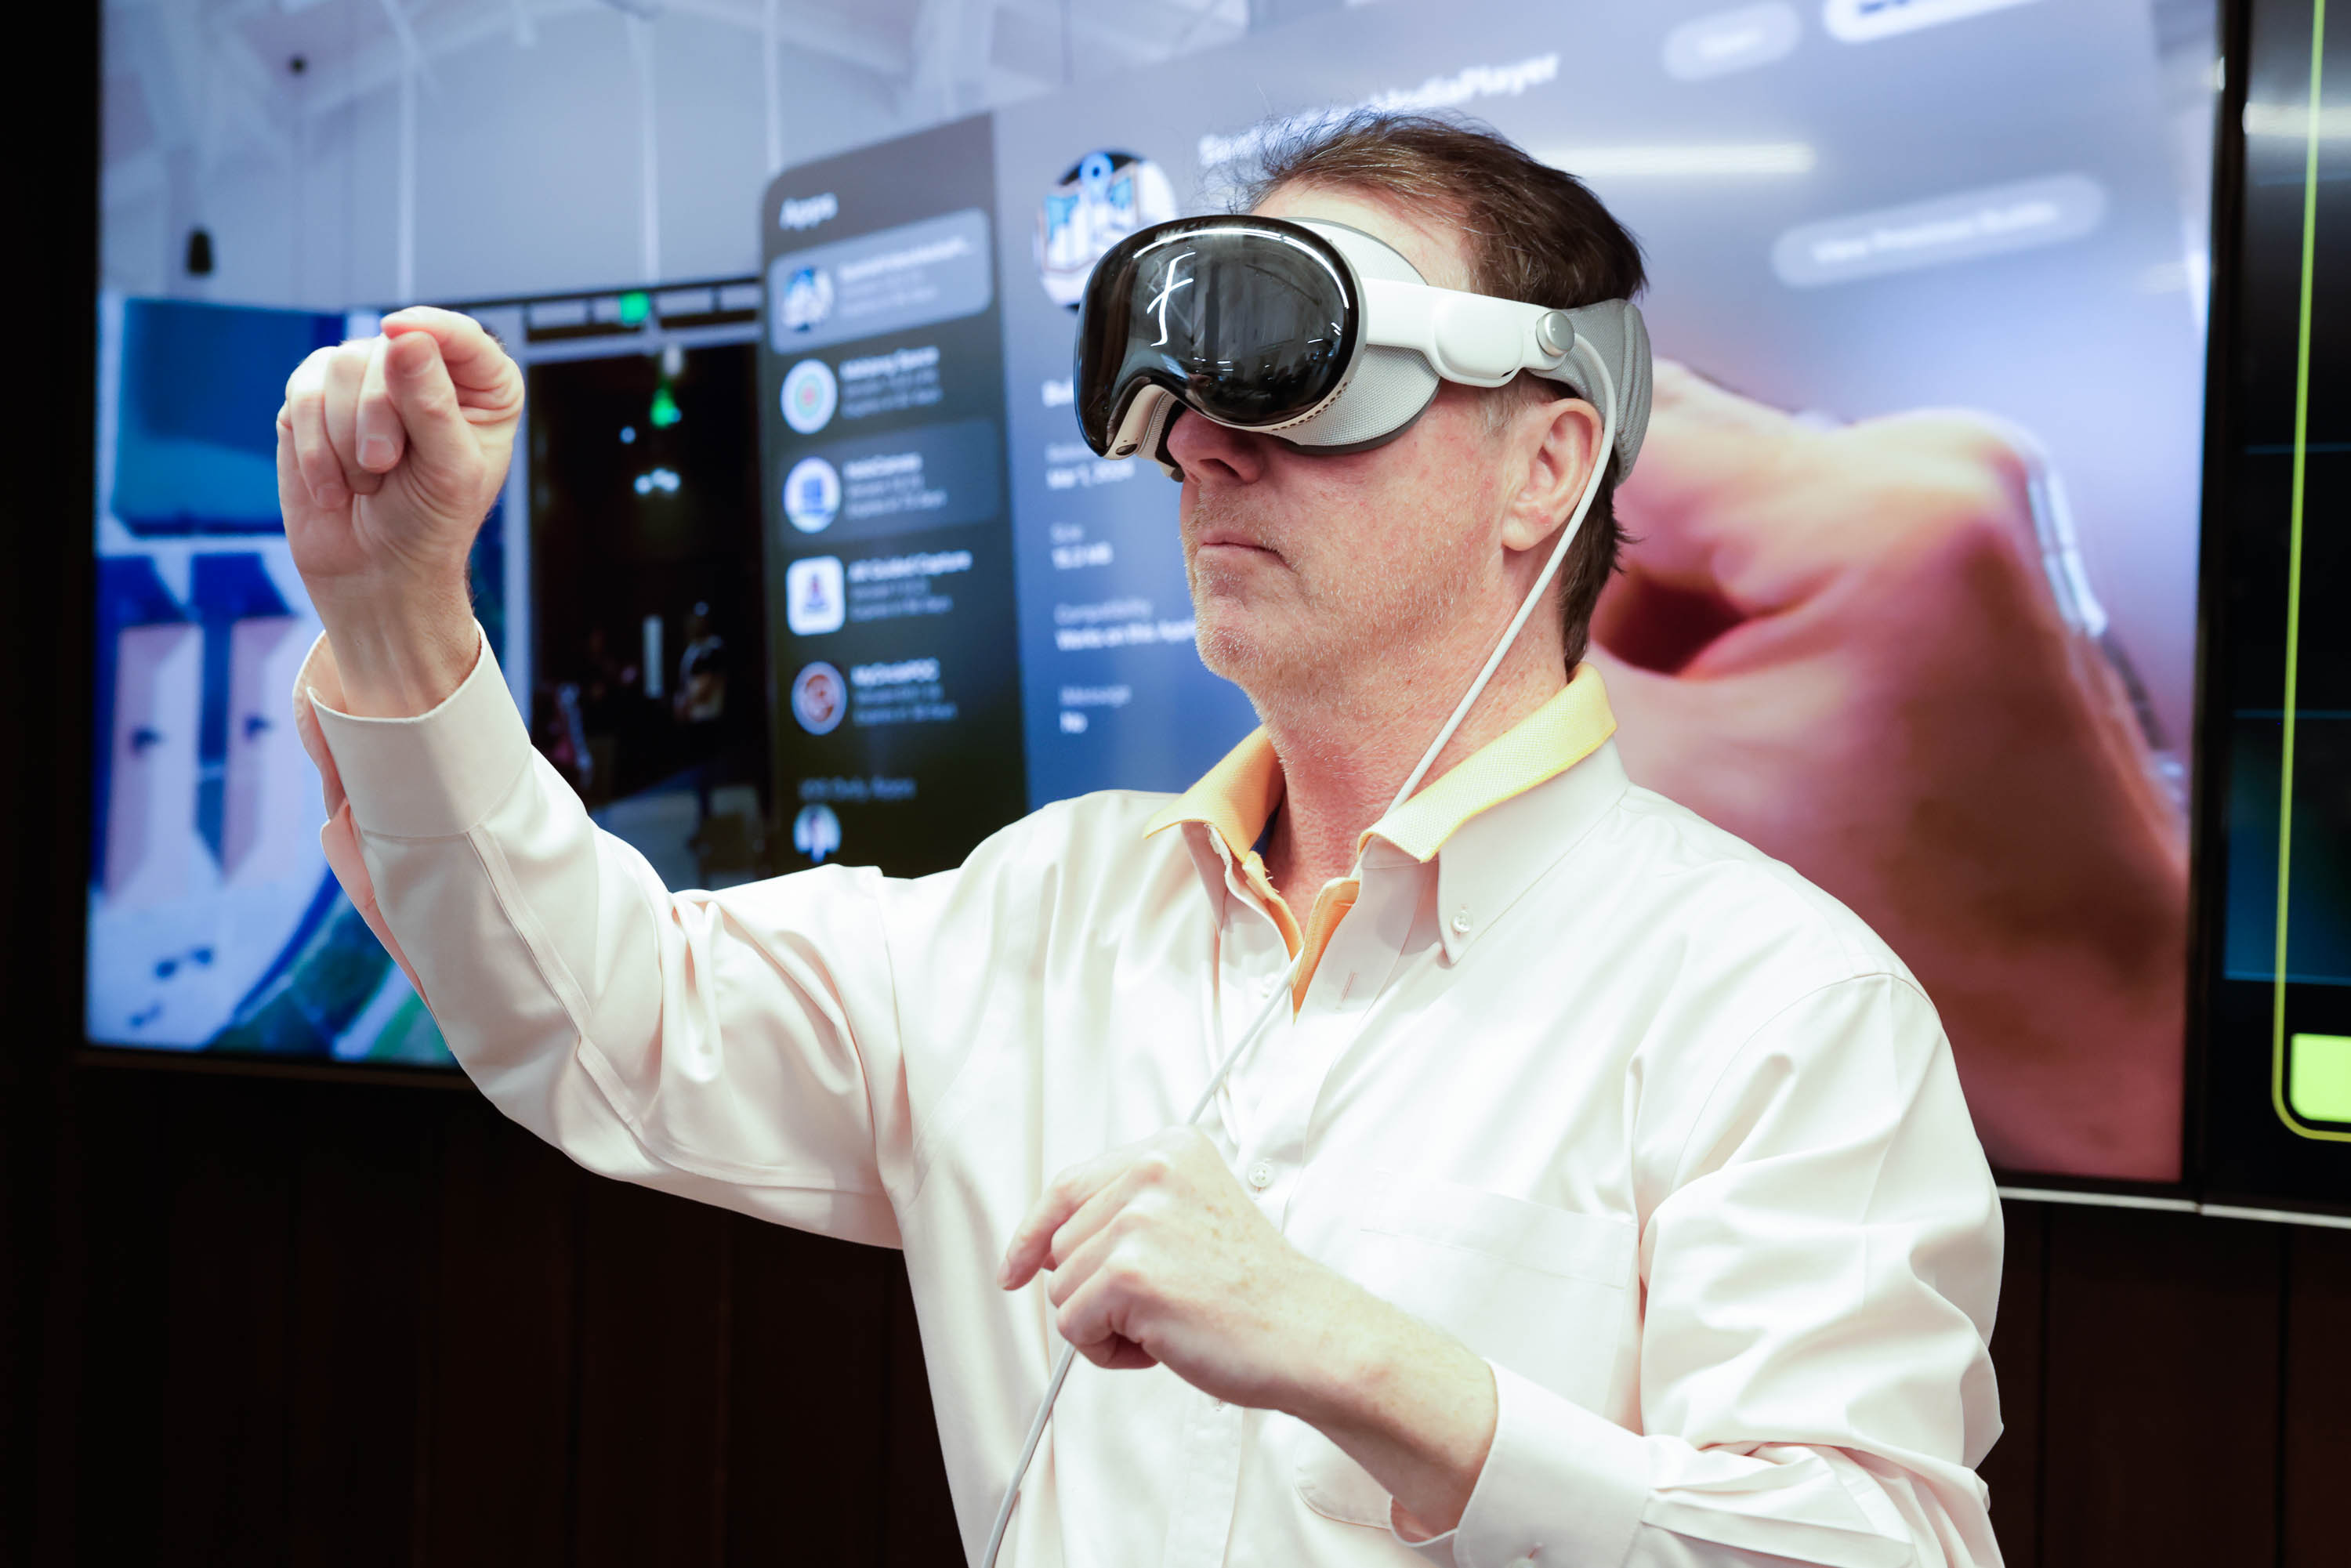 A man in a Apple Vision Pro headset gestures his hands into the air as screens display tech interfaces in the background.